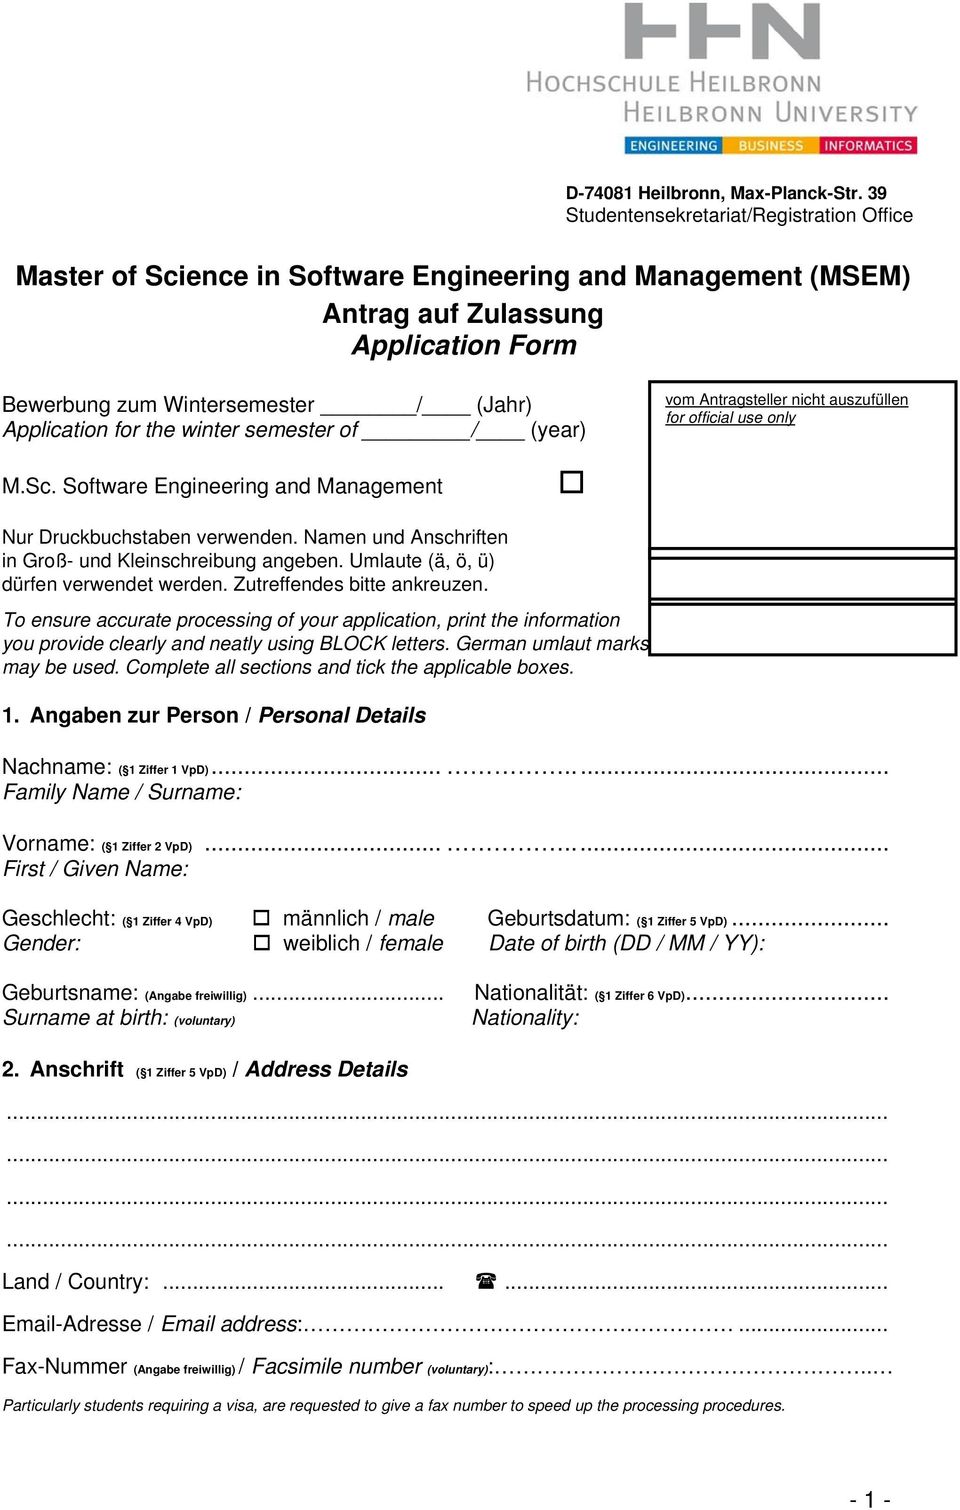 Umlaute (ä, ö, ü) dürfen verwendet werden. Zutreffendes bitte ankreuzen. To ensure accurate processing of your application, print the information you provide clearly and neatly using BLOCK letters.